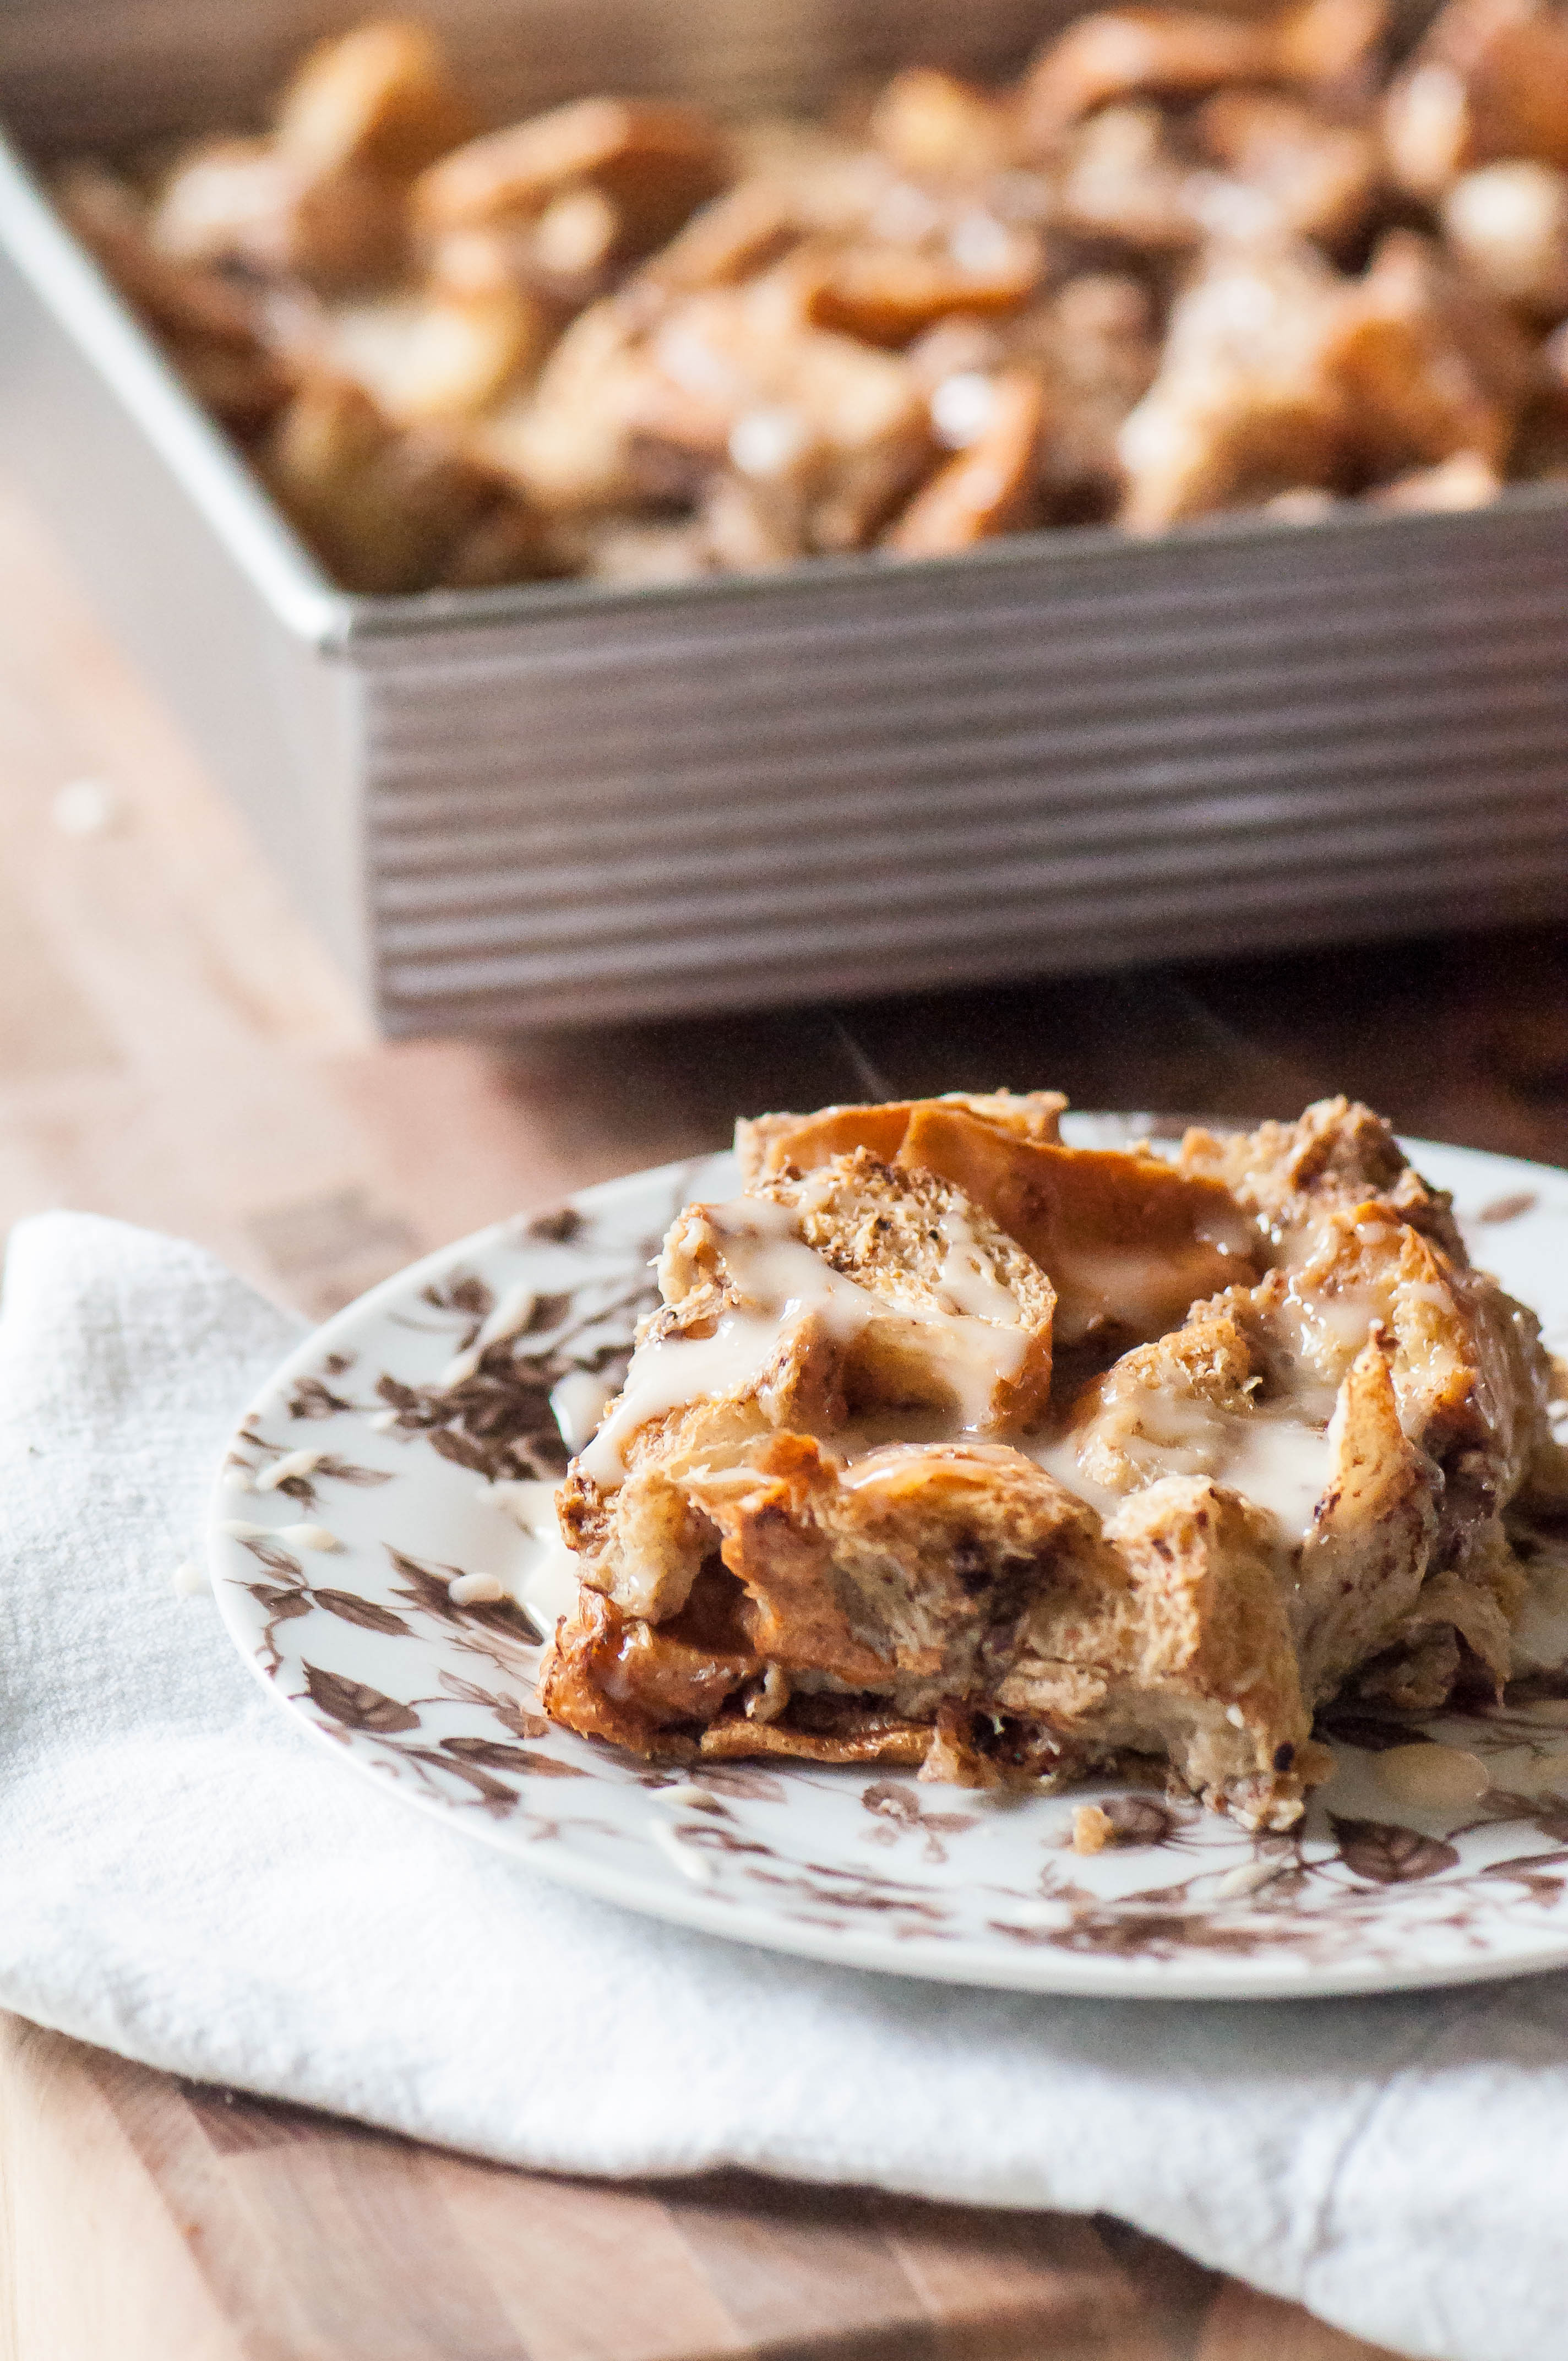 Keep this Overnight Coffee French Toast Bake on your radar for a super simple Mother's Day breakfast. Treat mom to a special breakfast she deserves.